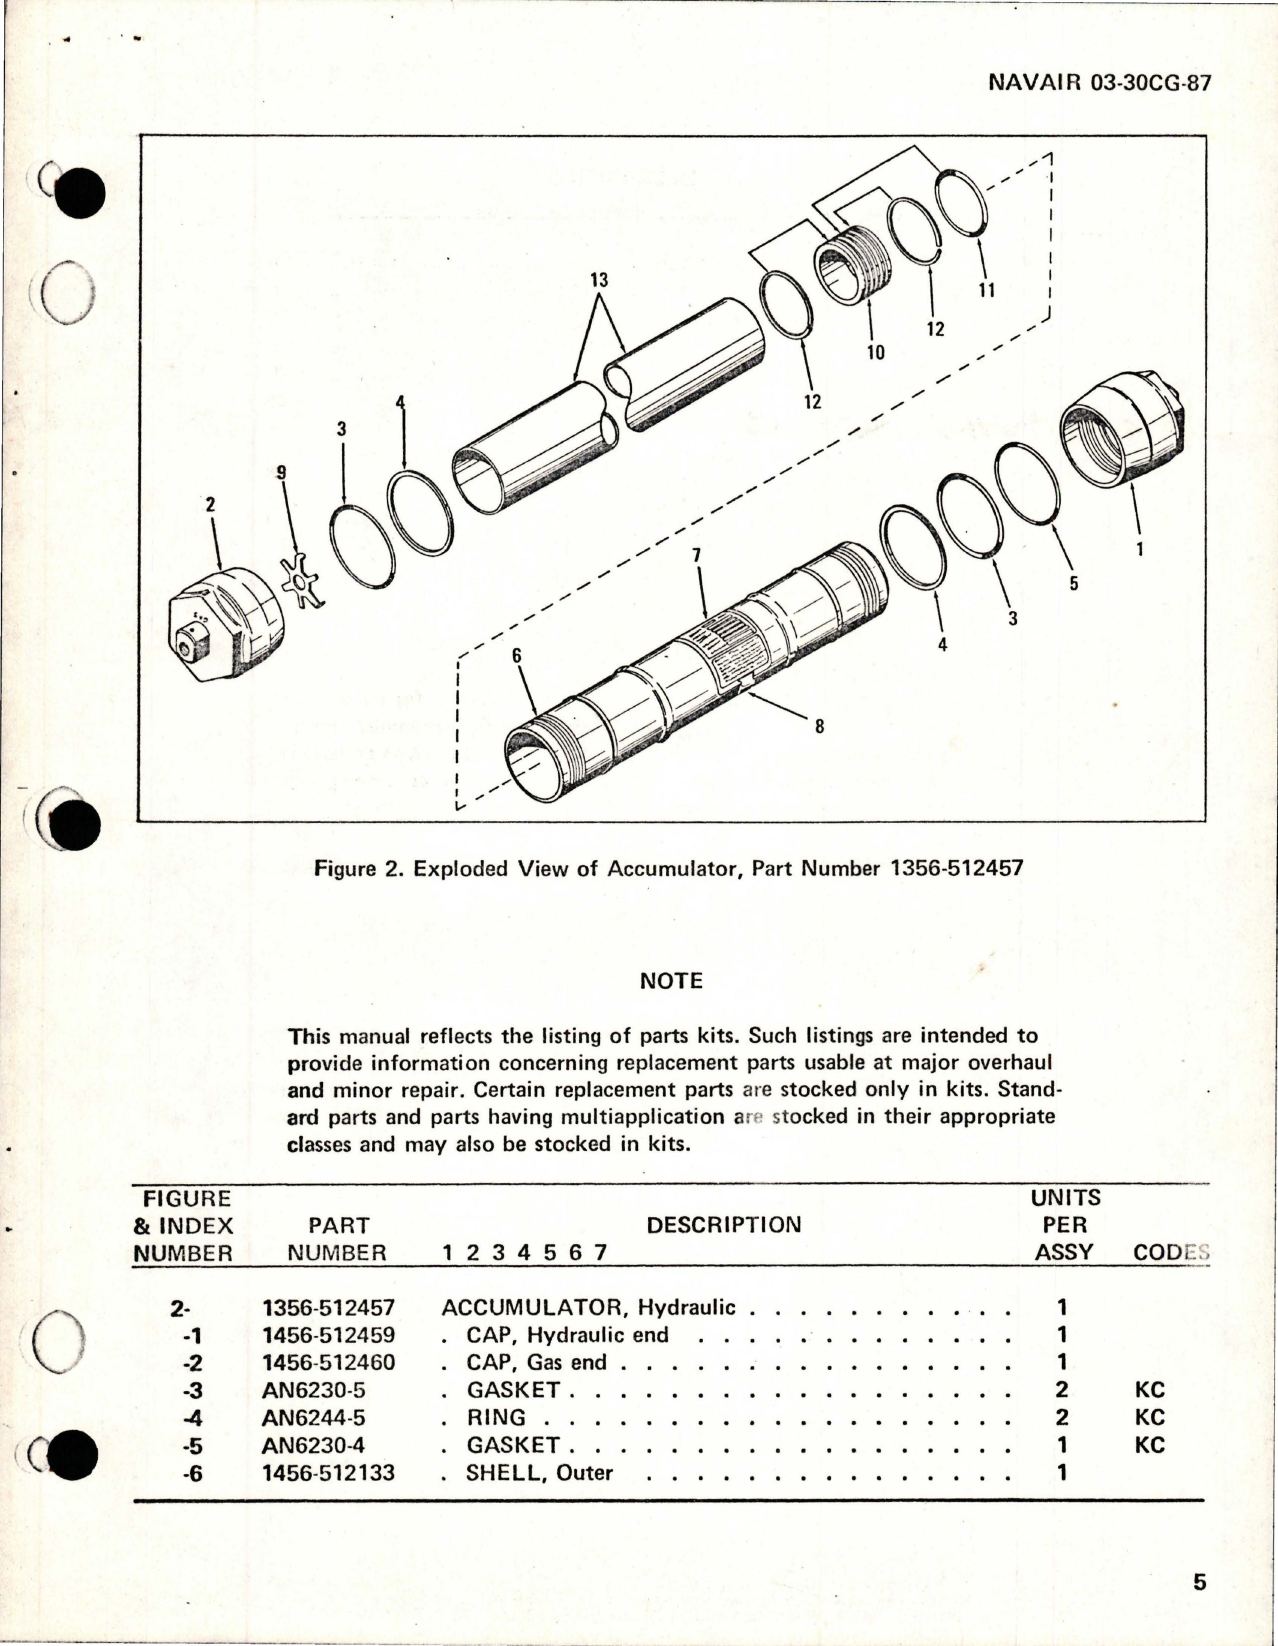 Sample page 5 from AirCorps Library document: Overhaul Instructions with Parts Breakdown for Hydraulic Accumulator - Part 1356-512457